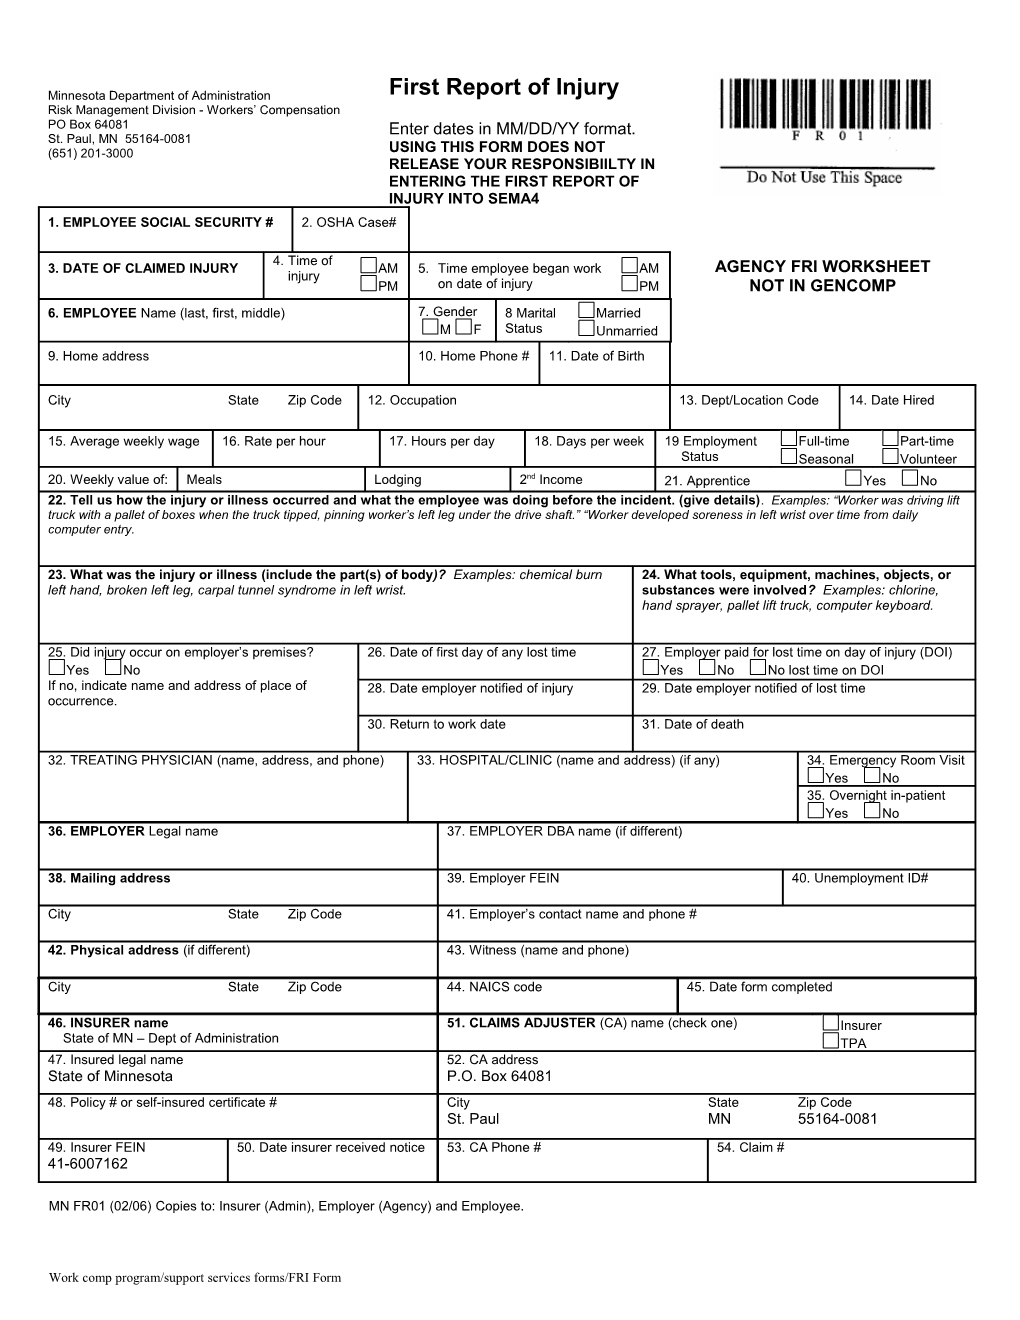 First Report of Injury Form